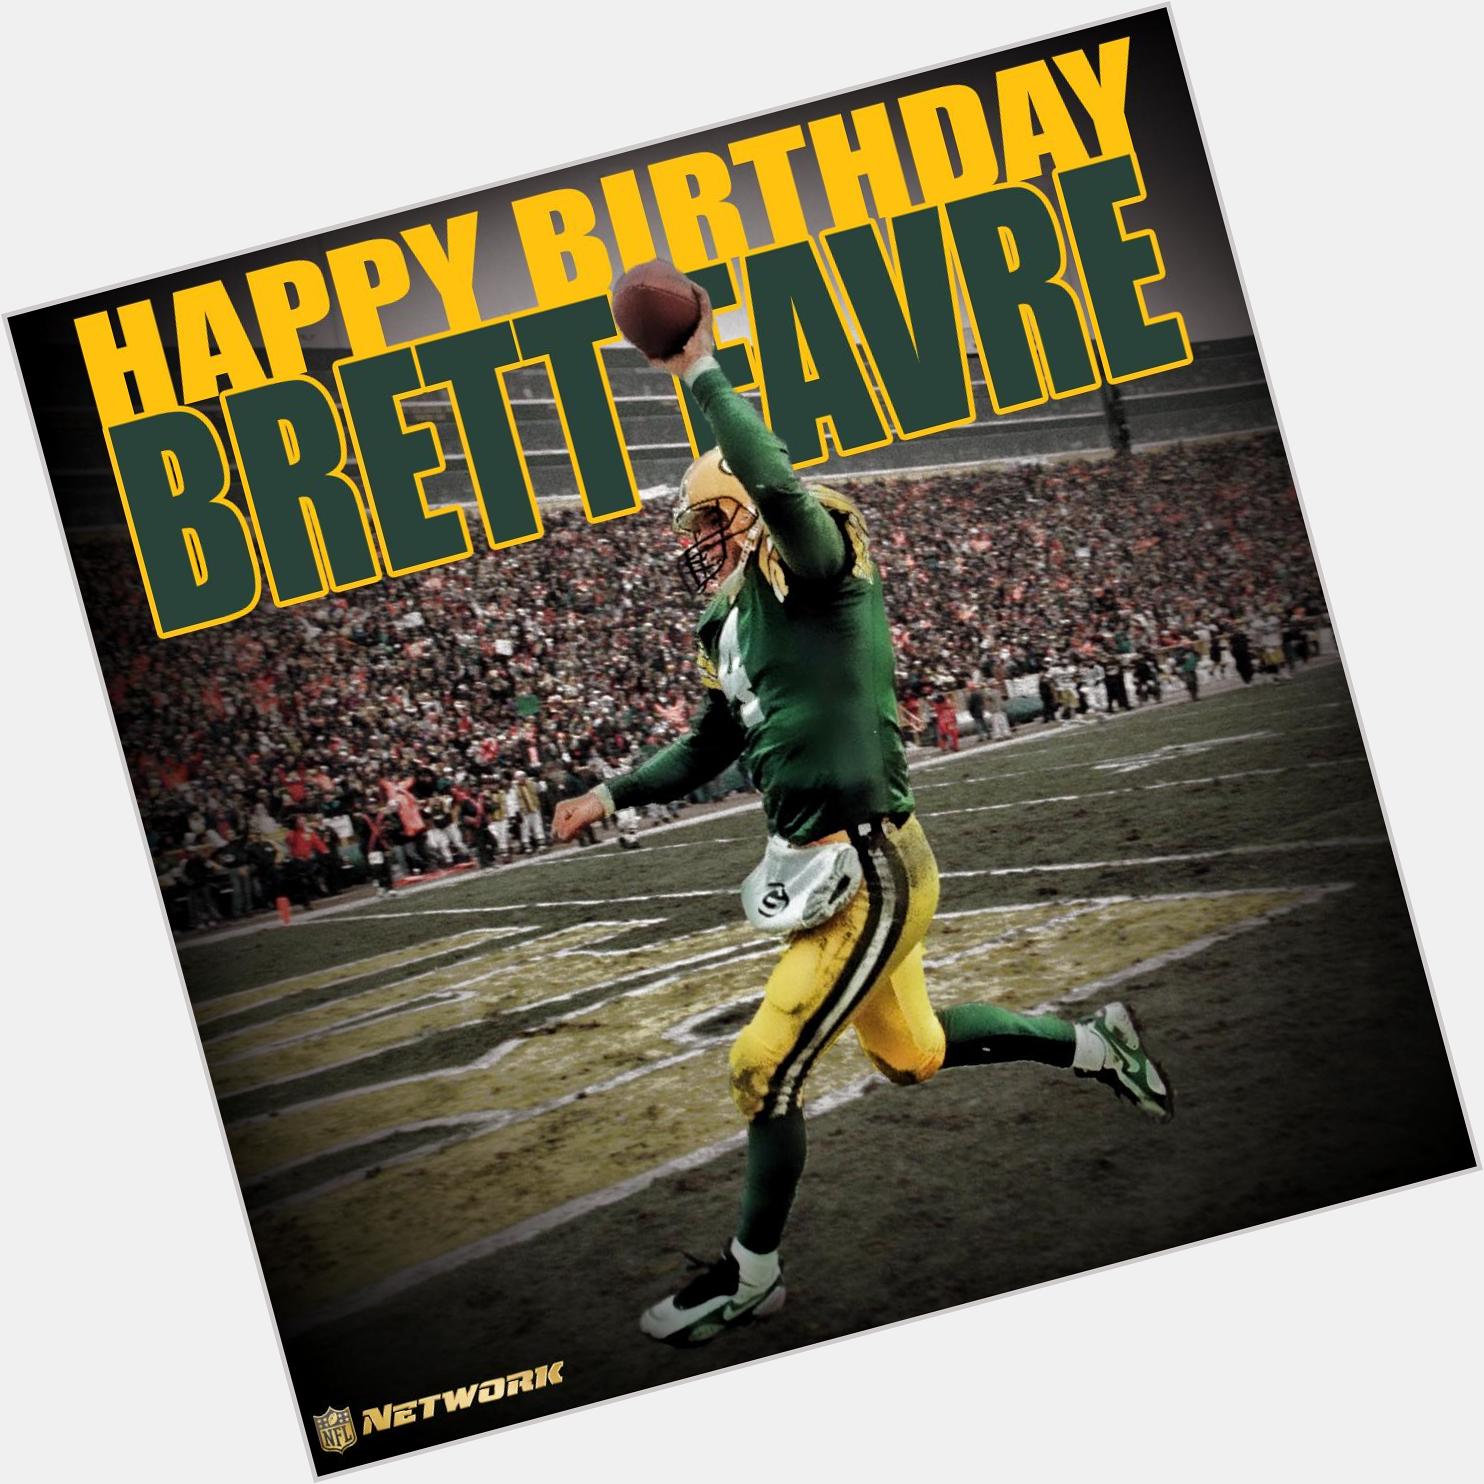 Happy birthday to the all-time passing yards leader (71,838) & legend, Brett Favre! 